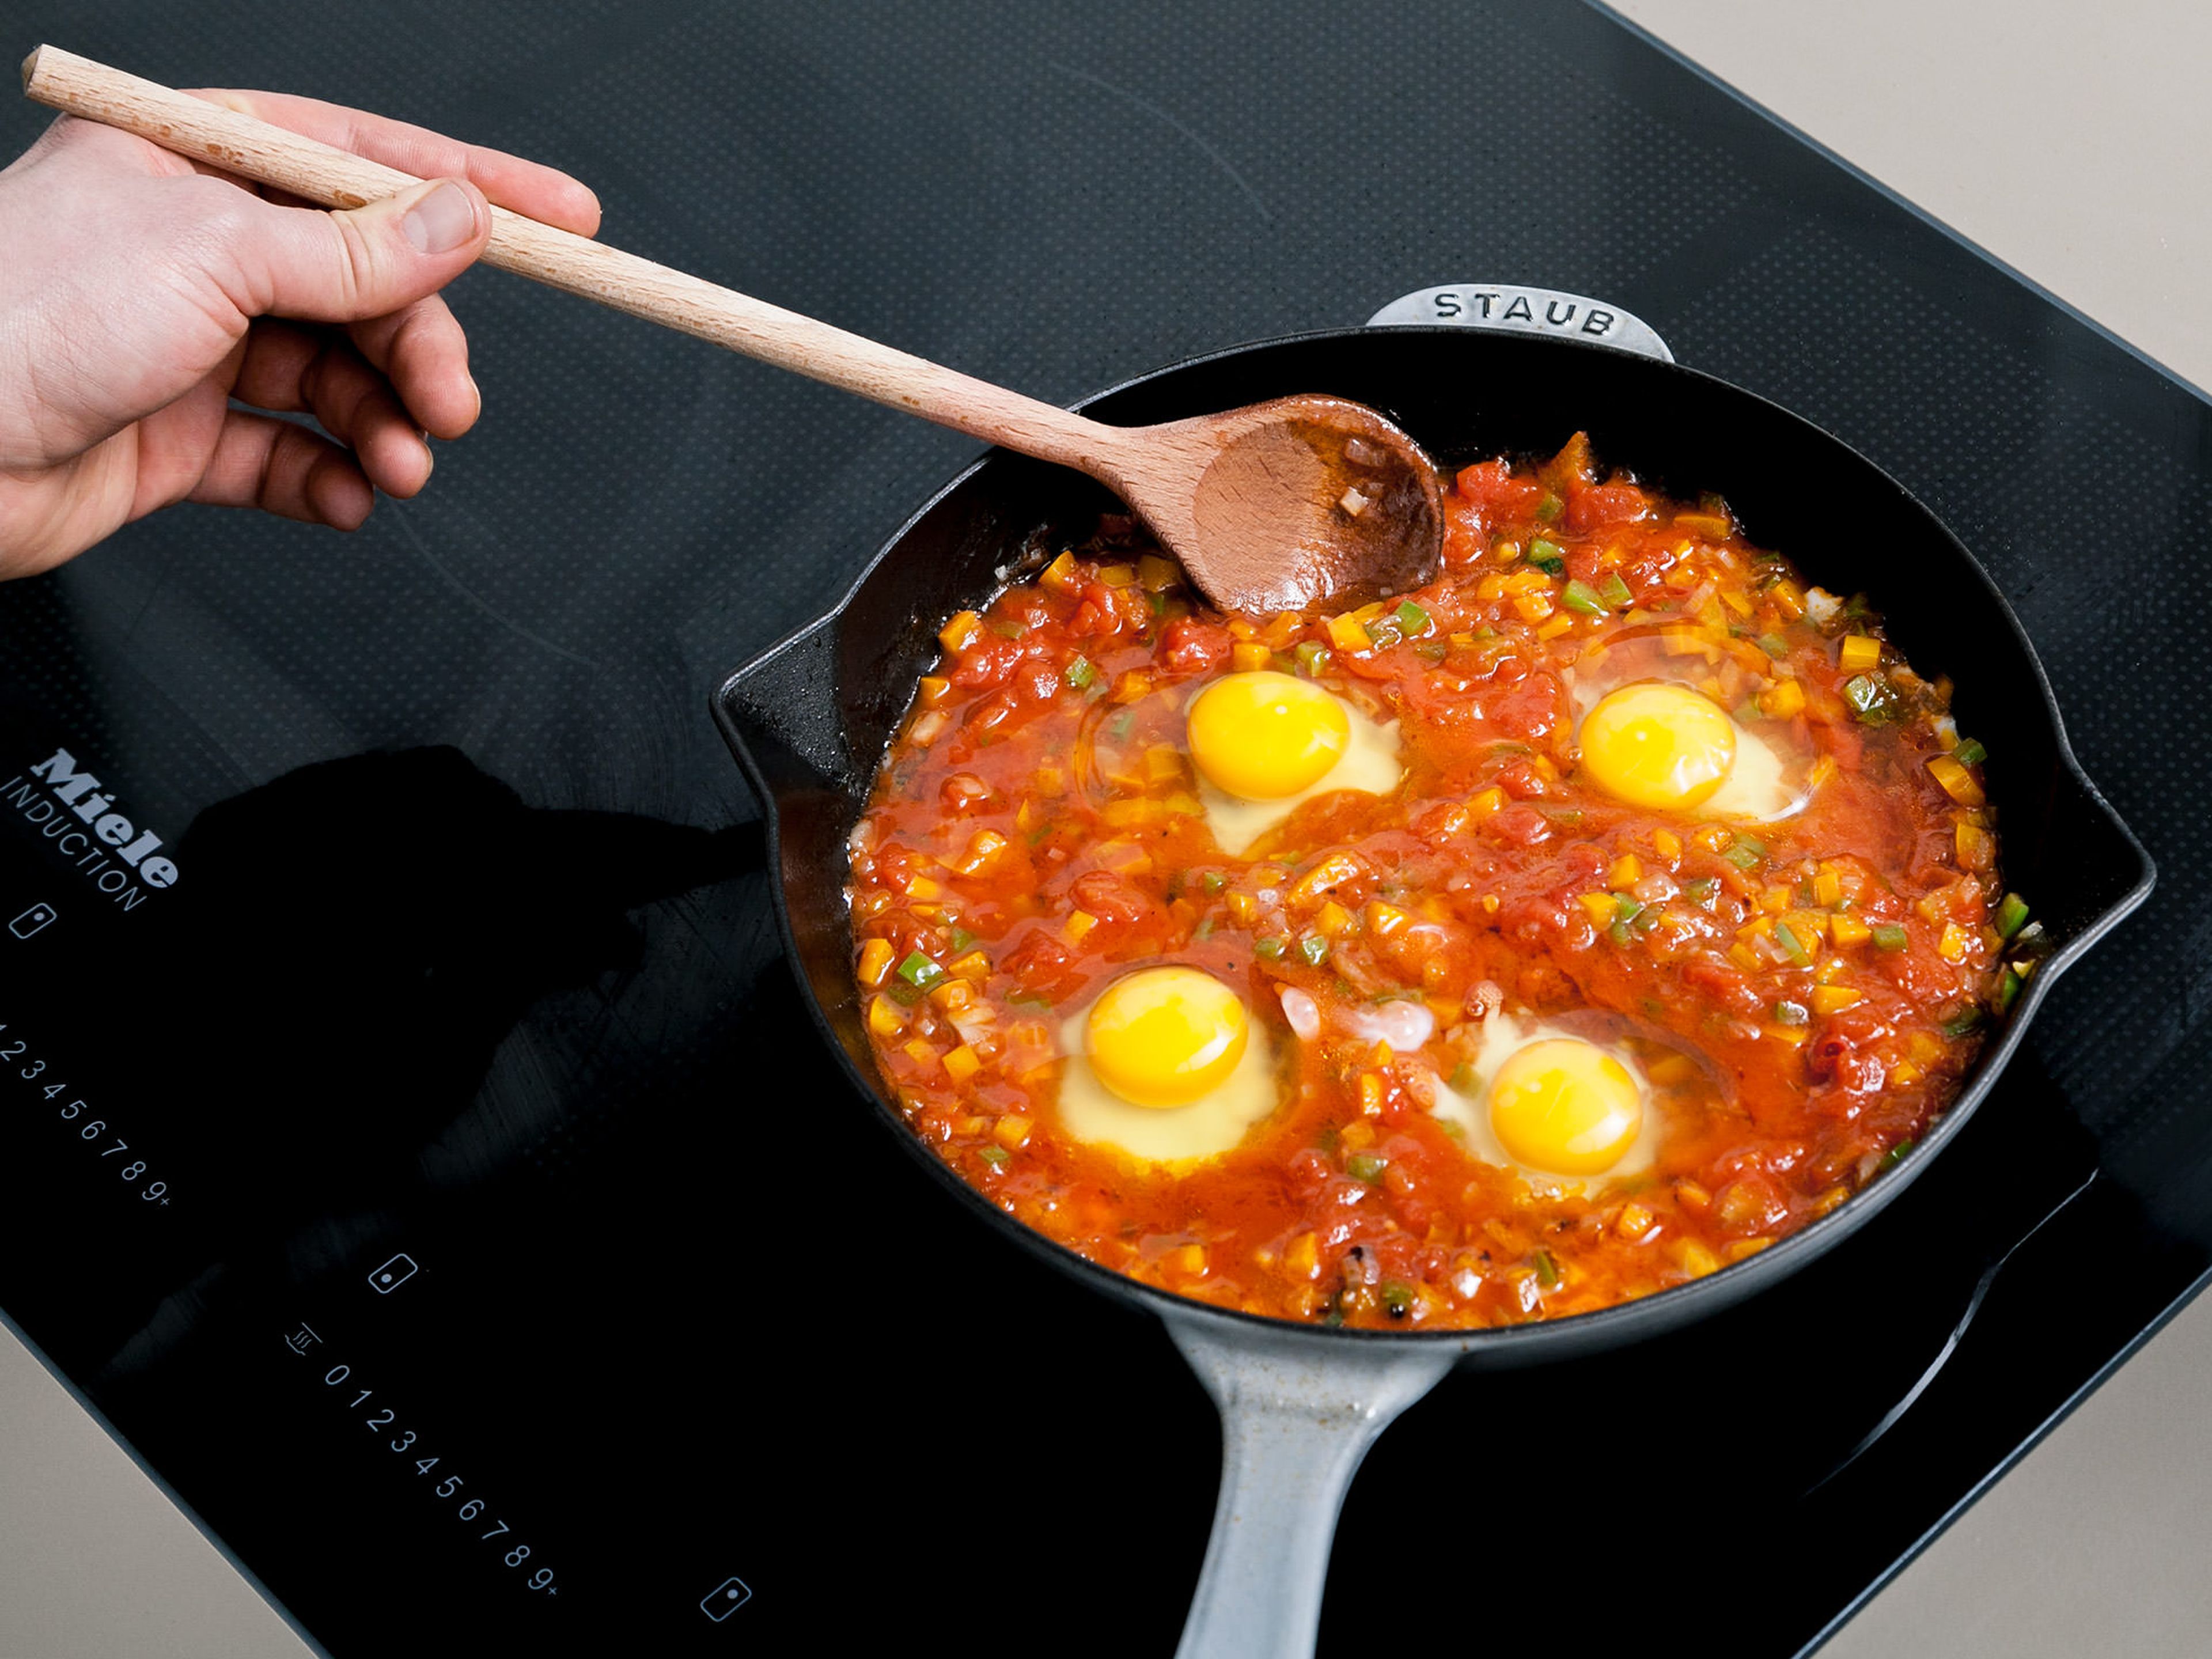 With a cooking spoon, create hollows in the pepper-tomato mixture and crack an egg in each hollow. Simmer for approx. 1 min., or until eggs are slightly set. Then, stir eggs in circular movements, distributing them around the pan. Simmer for approx. 5 more min., or until eggs have set. Crumble feta over and garnish with chopped parsley. Enjoy with fresh bread!